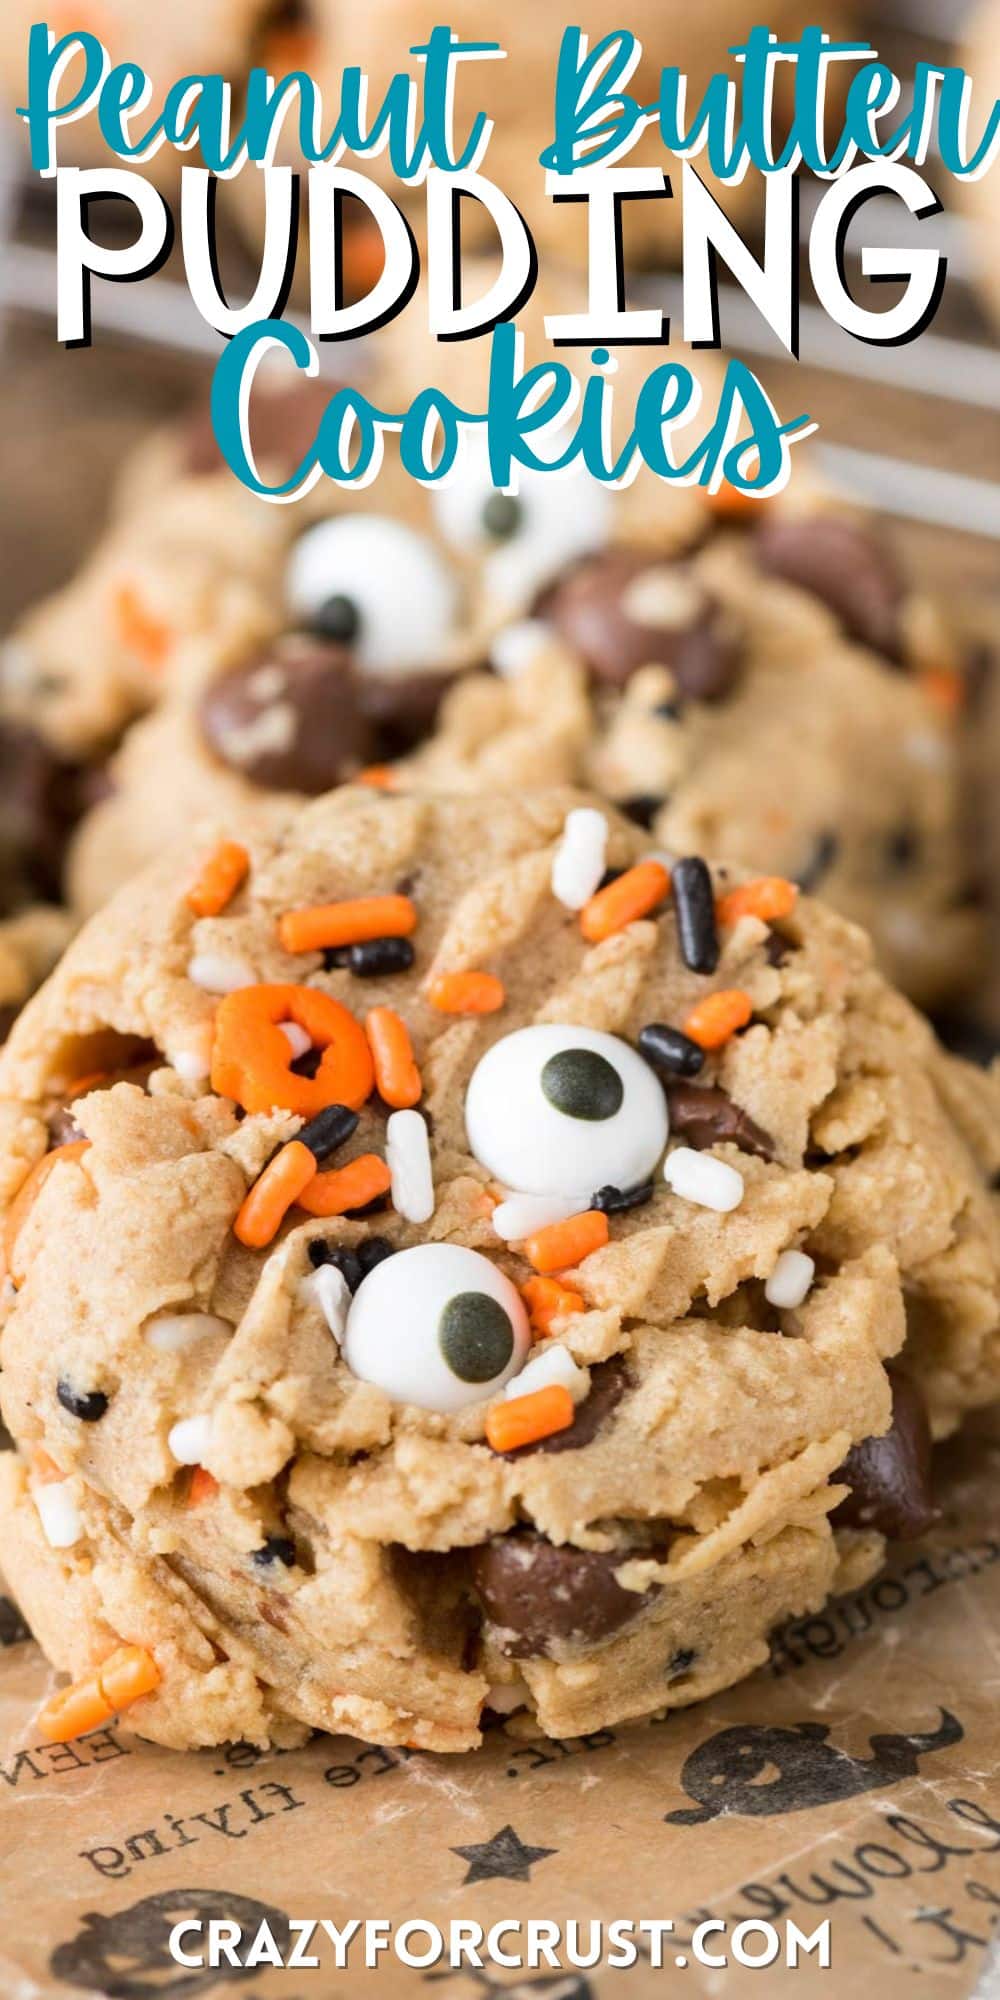 pudding cookies with orange and black sprinkles and candy eyes baked in with words on the image.